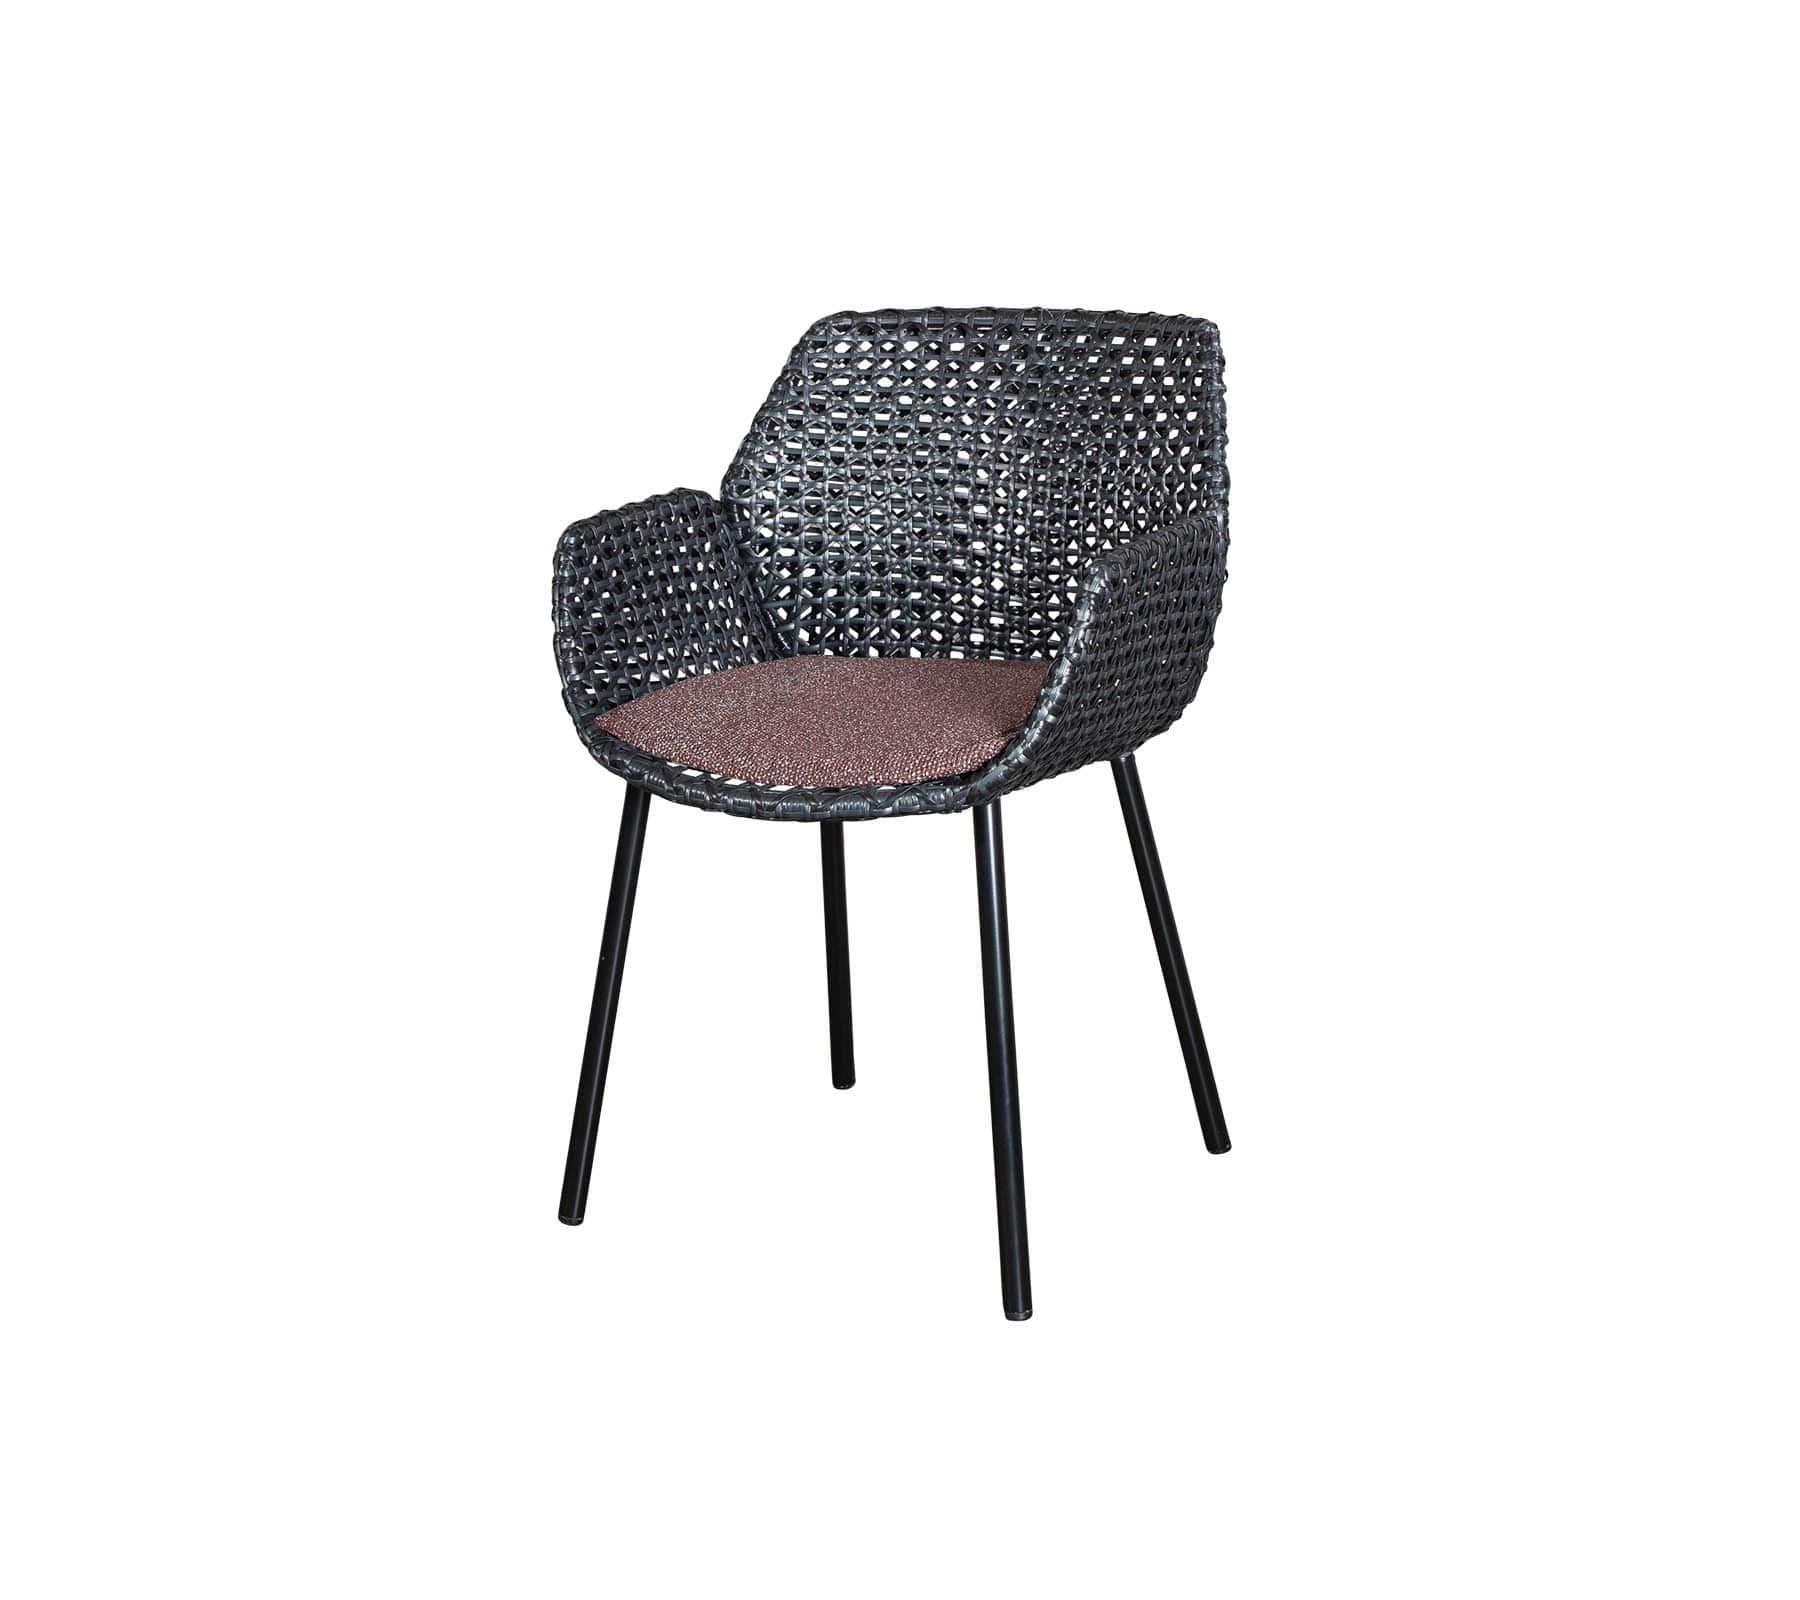  Boxhill's Vibe black outdoor armchair with maroon cushion on white background